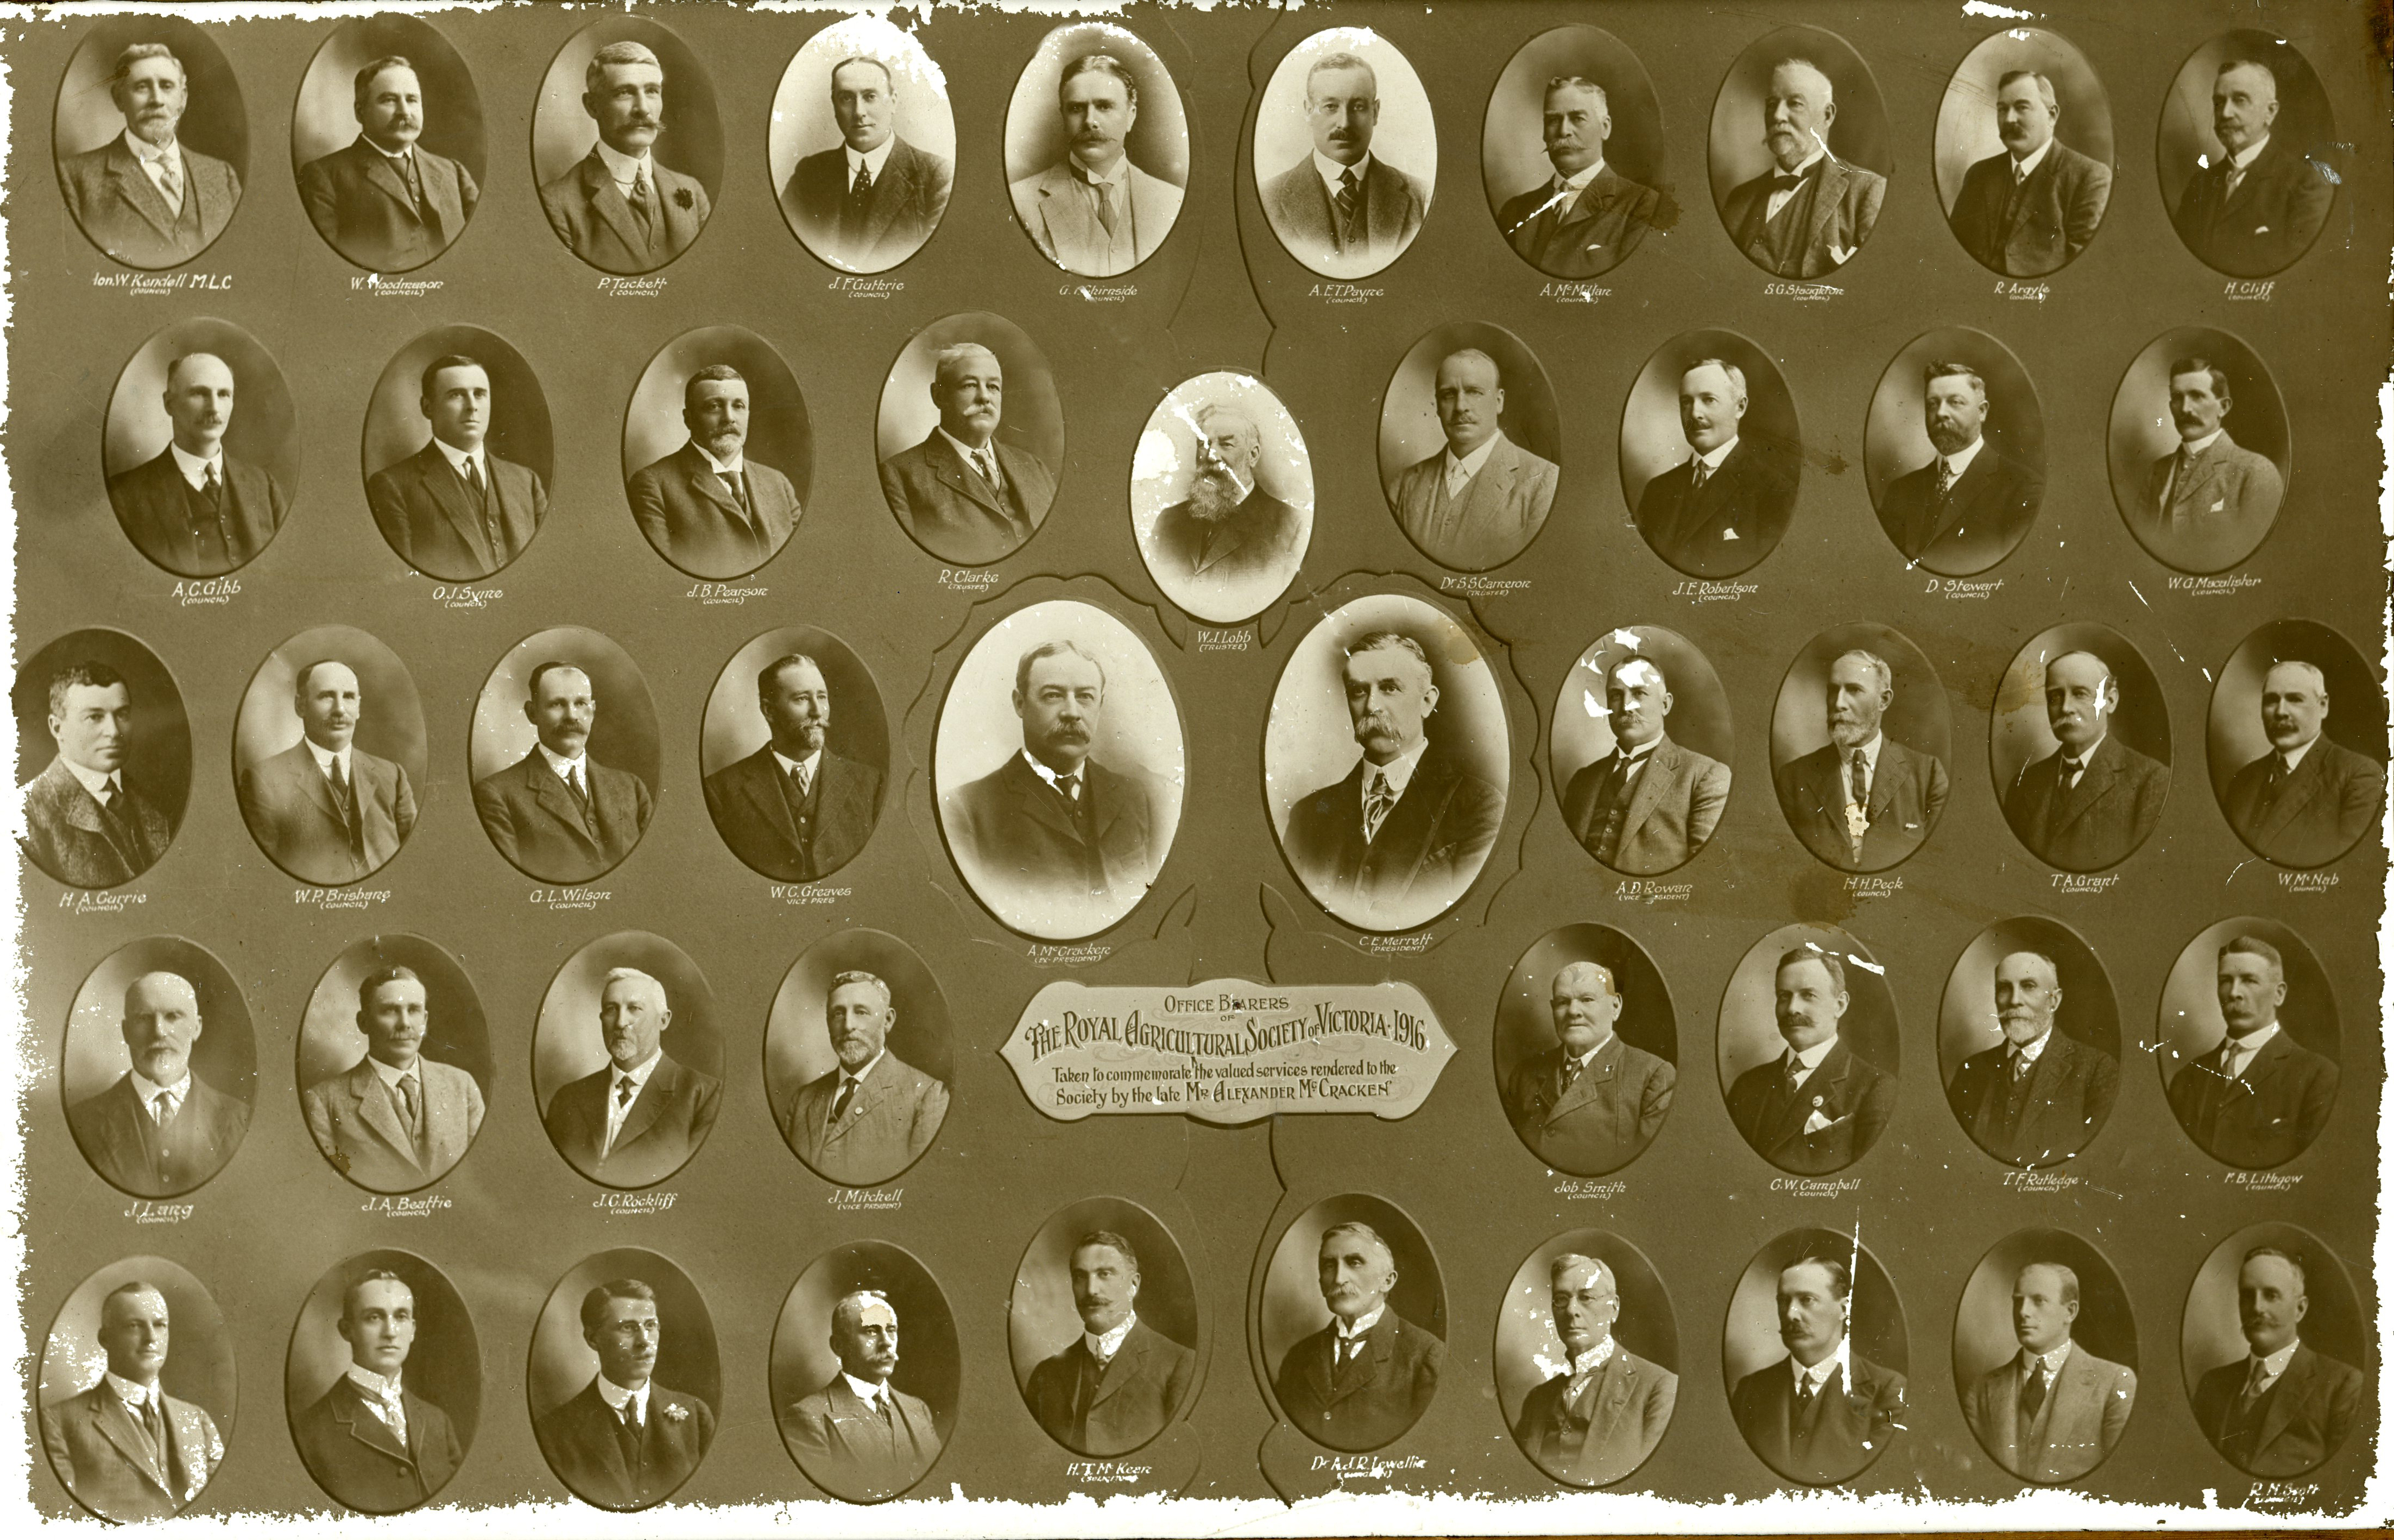 Source: 1916 Office Bearers of the Royal Agricultural Society of Victoria, Melbourne Royal Heritage Collection. George Thomas Chirnside is in the top row, fifth from the left.